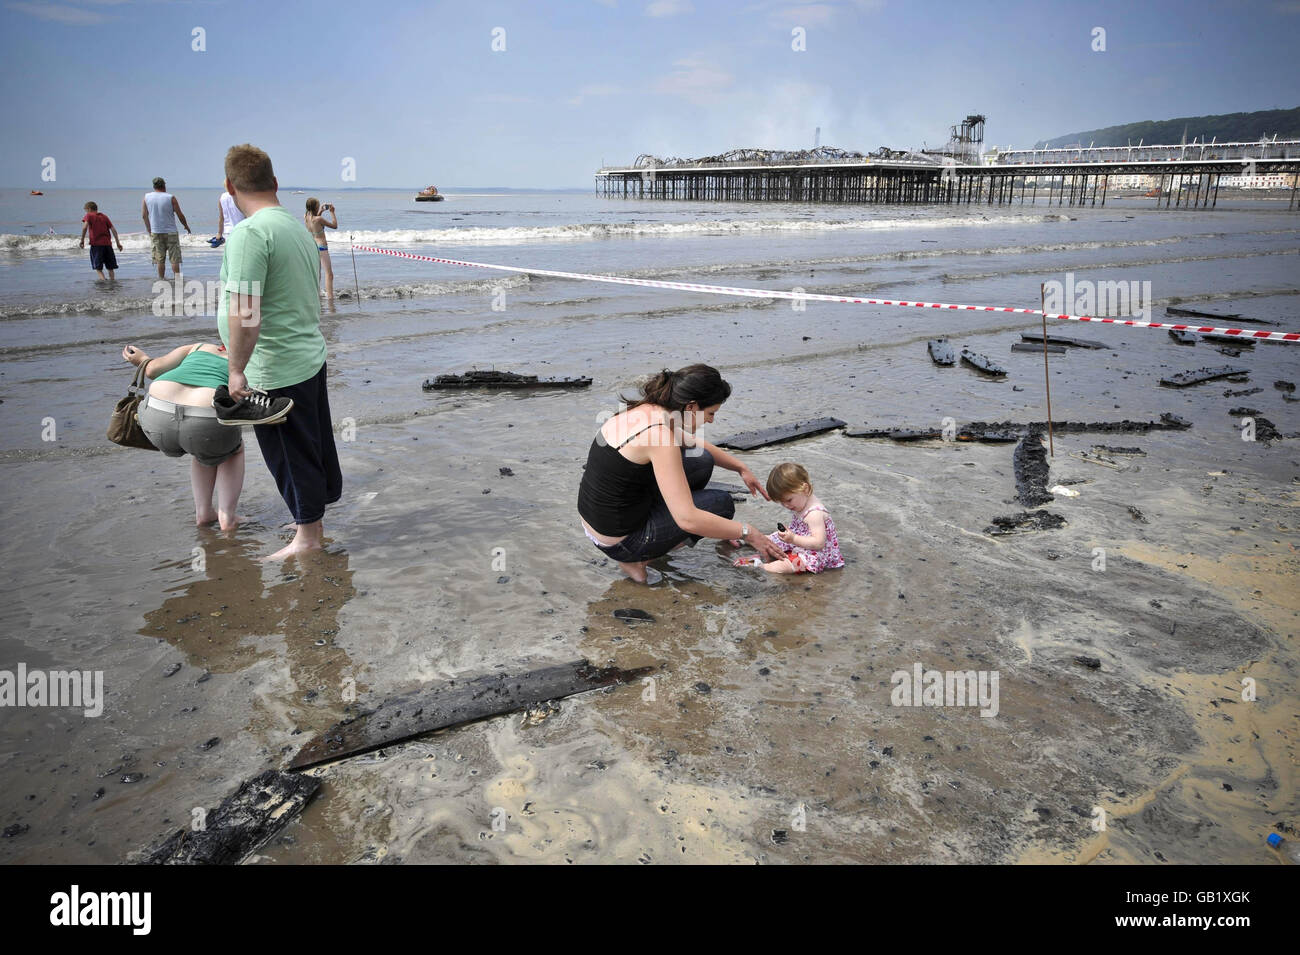 Holiday makers look on as burned debris is washed up on the beach next to the Grand Pier at Weston-super-Mare after a major fire broke out. Stock Photo